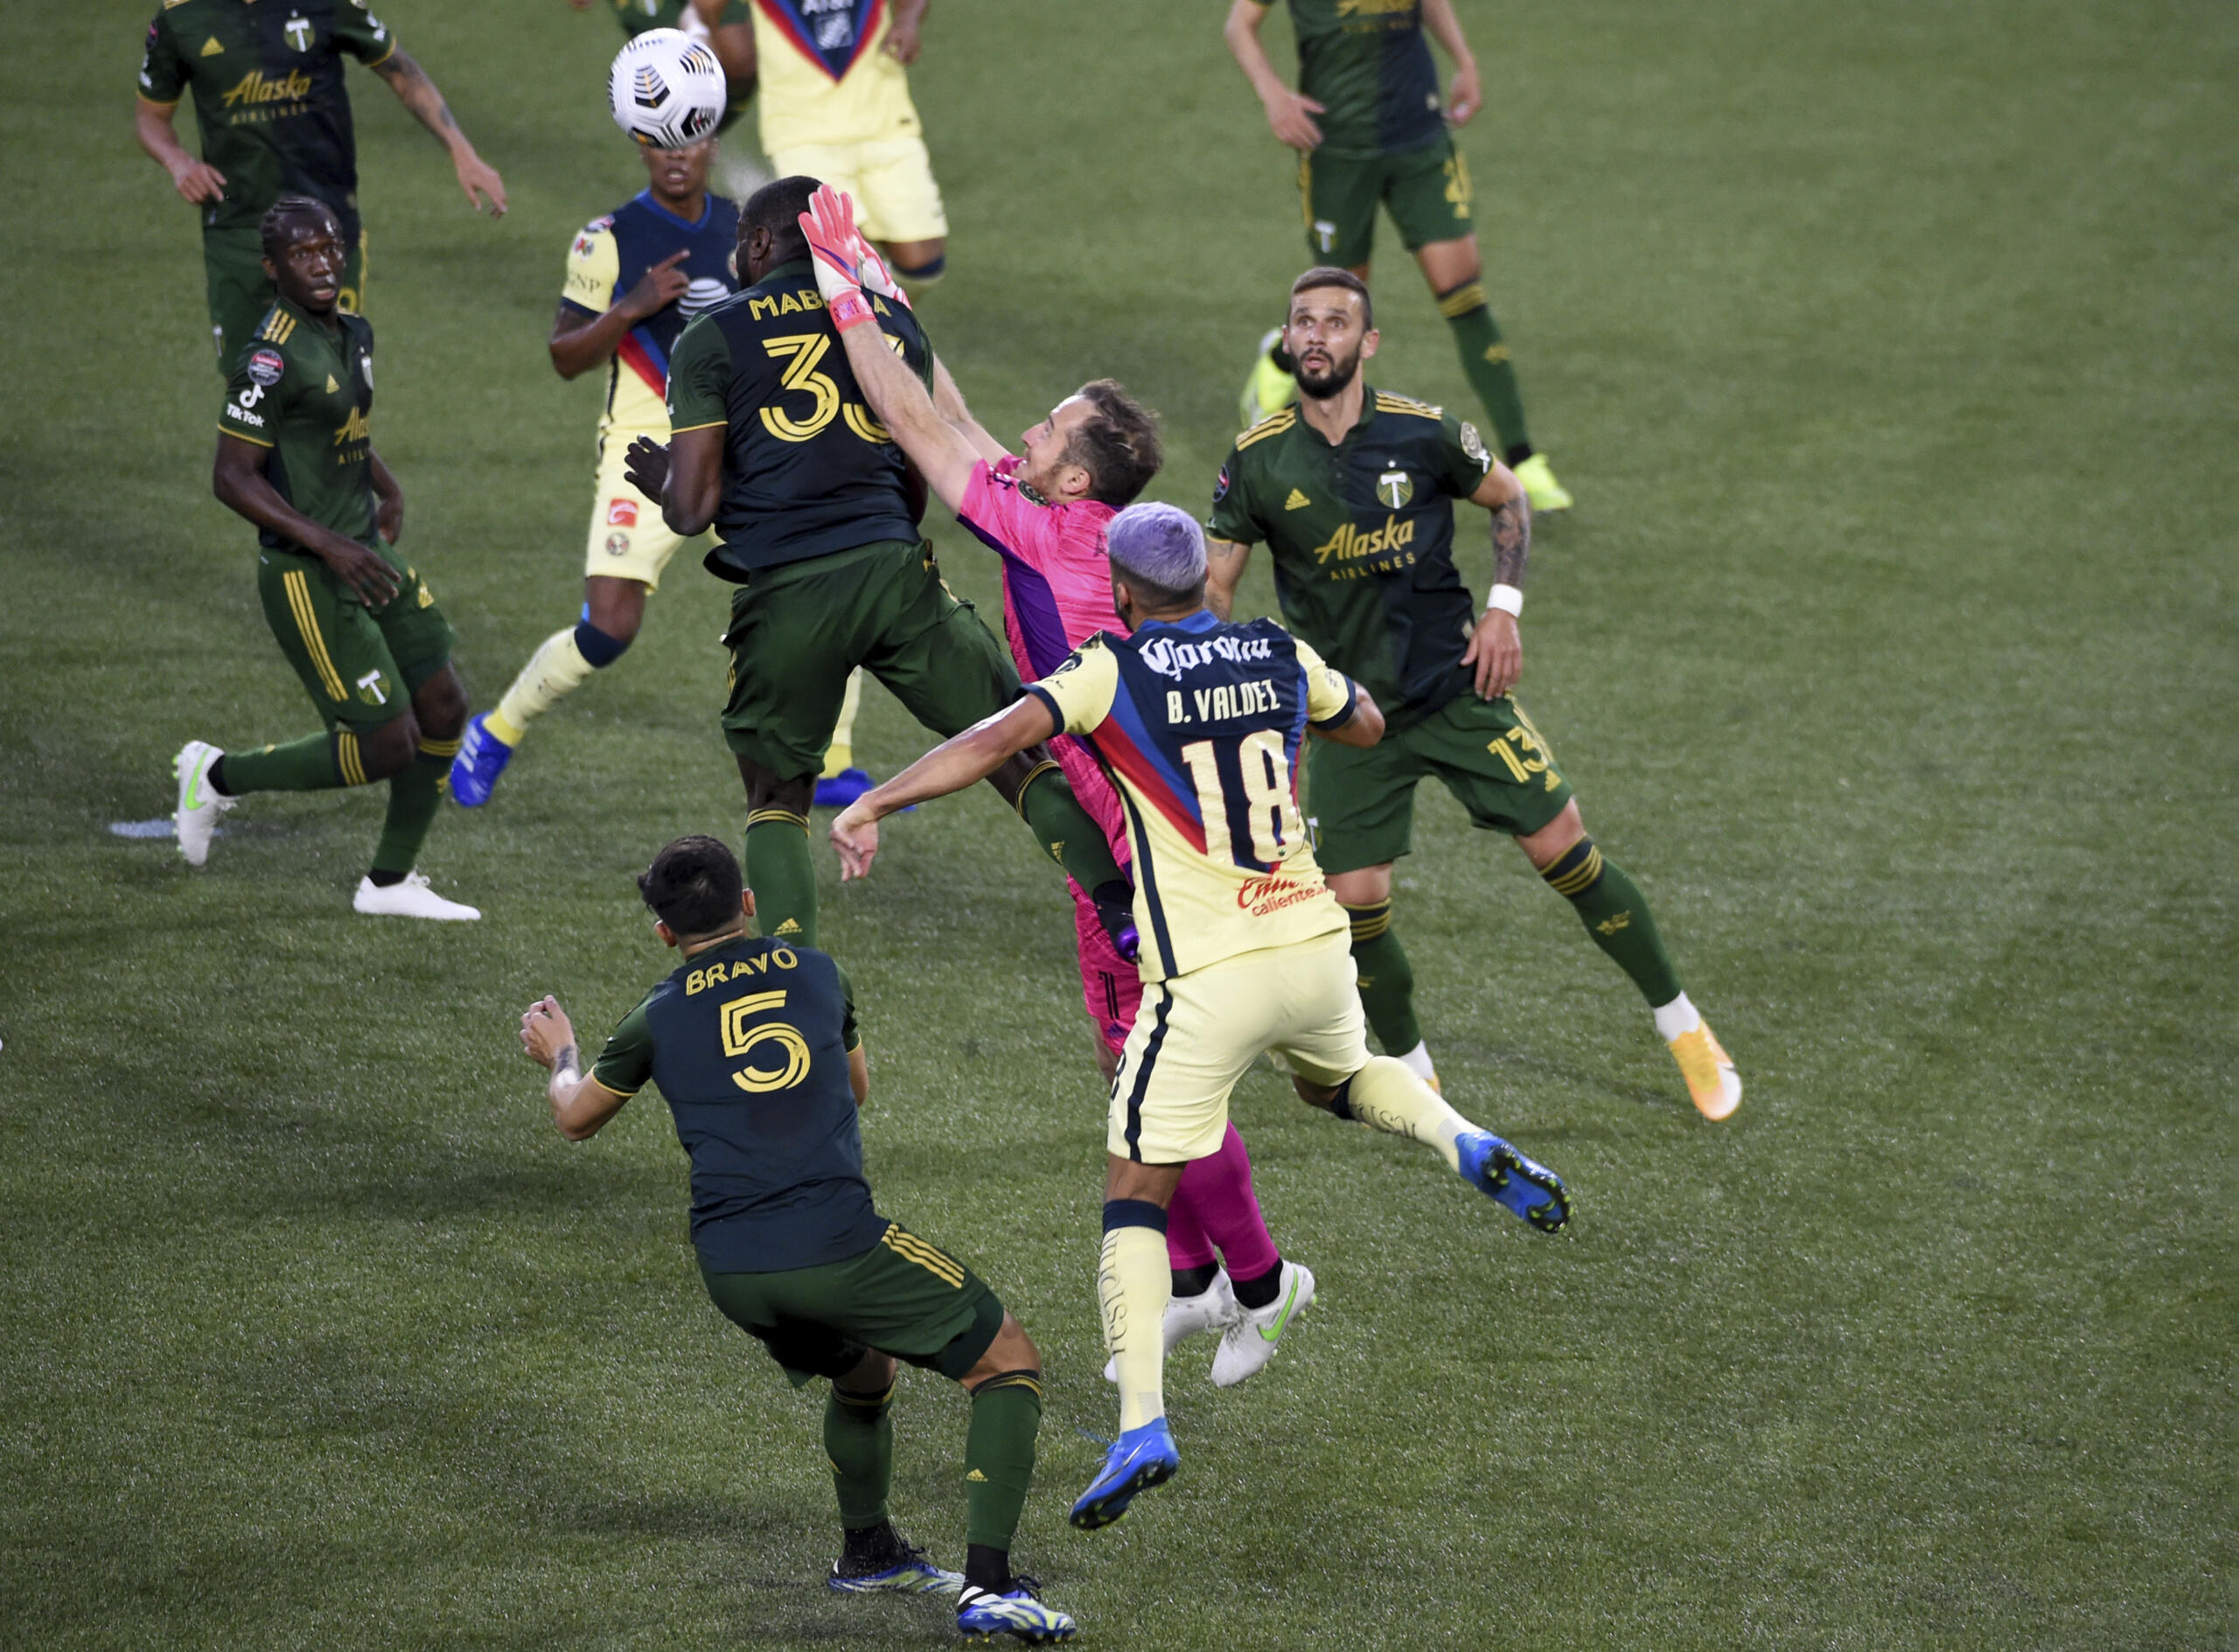 Portland Timbers goalkeeper Jeff Attinella, center, punches the ball away as Larrys Mabiala, left, and América defender Bruno Valdez, right, close in during the first half of a CONCACAF Champions League soccer match in Portland, Ore., Wednesday, April 28, 2021.